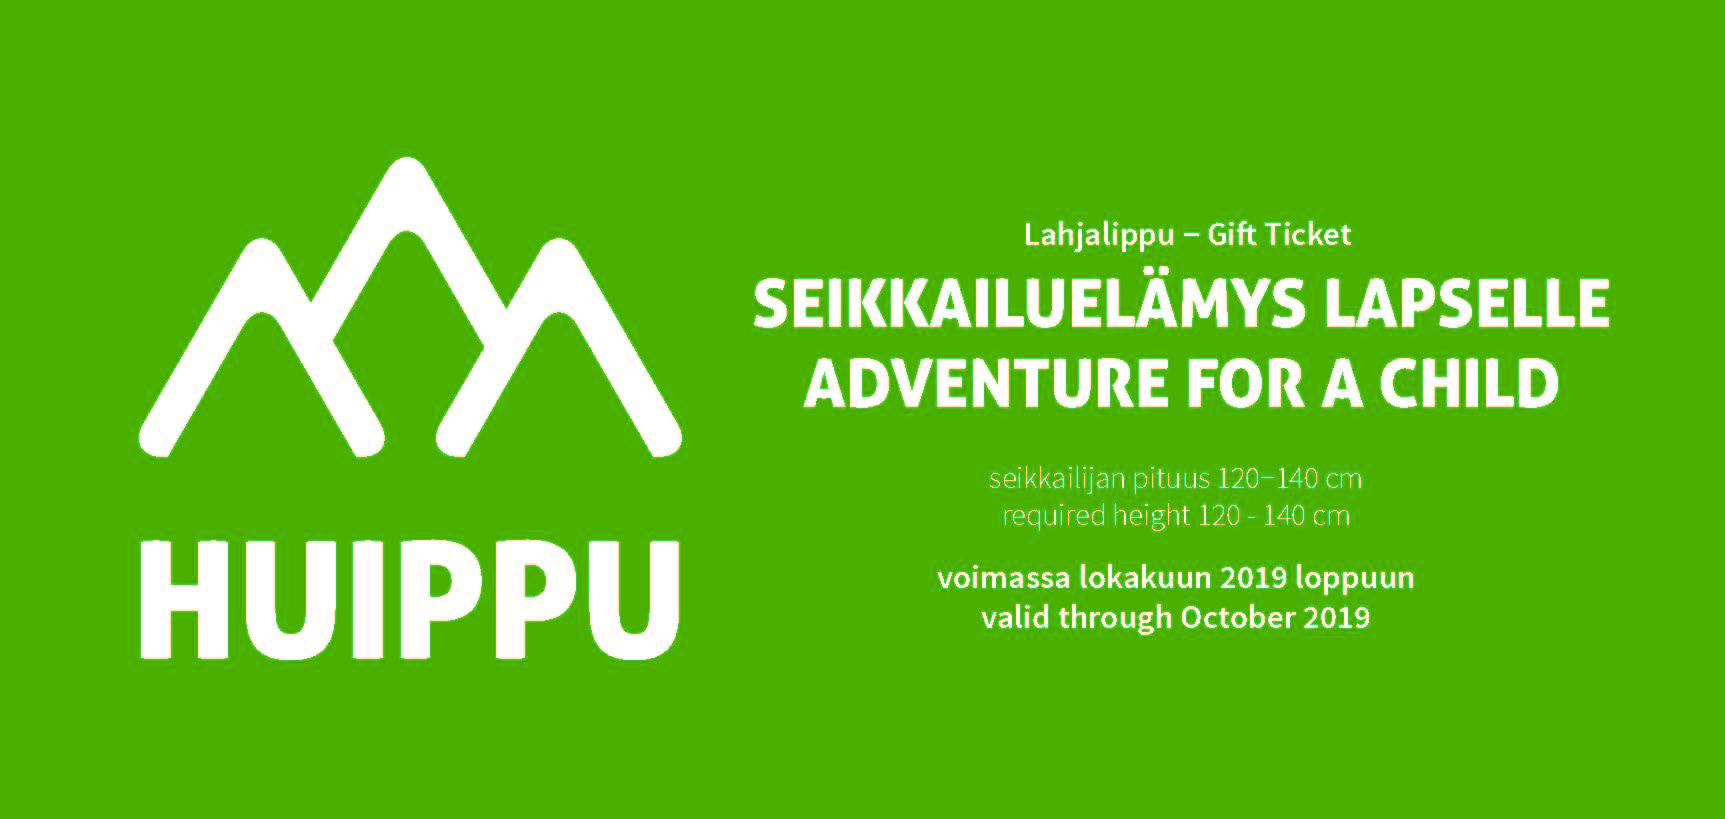 Treetop Adventure Huippu Children’s Gift card for those between 120-140 cm tall  is bright green.